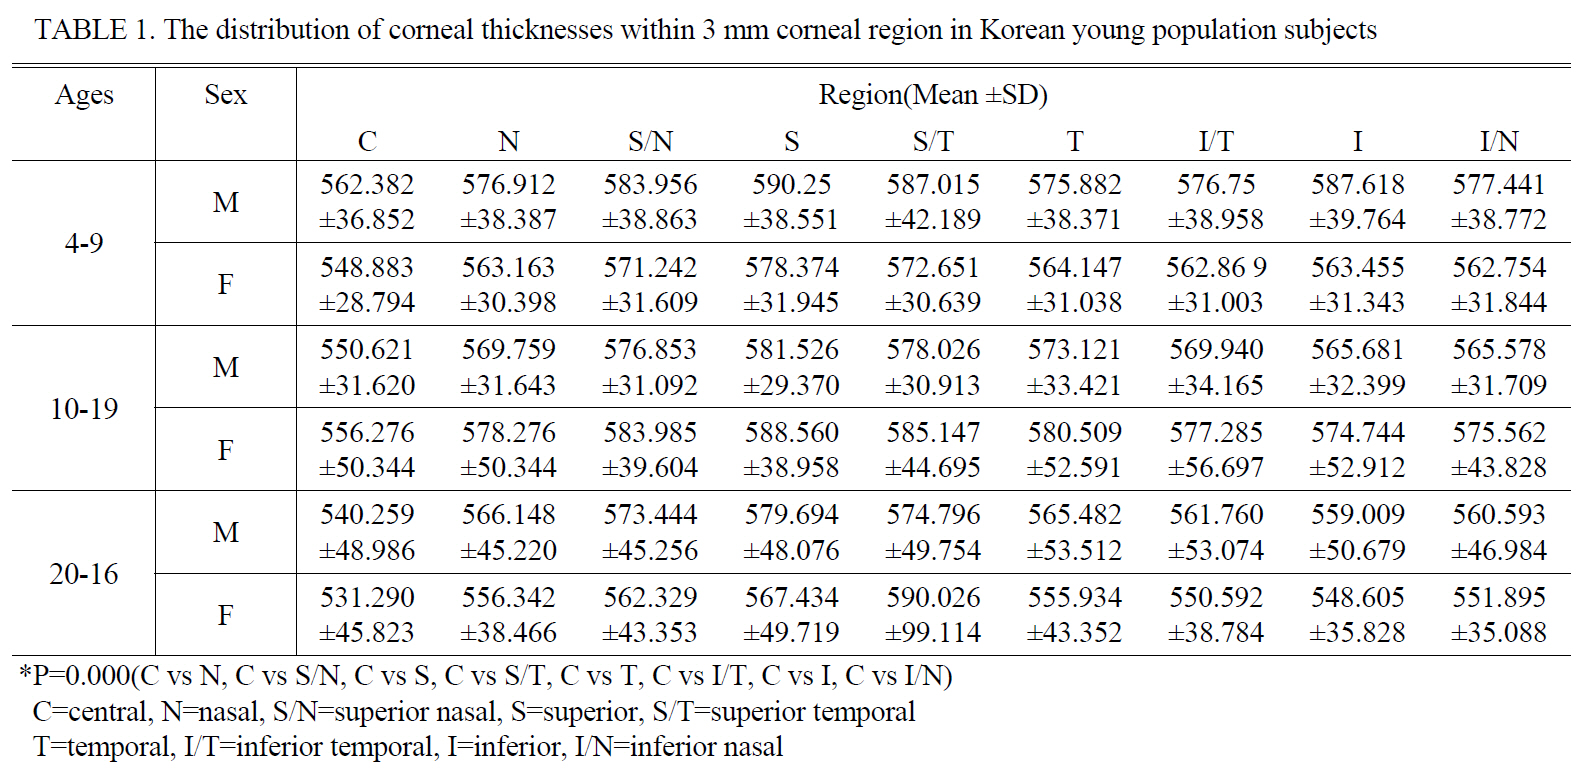 The distribution of corneal thicknesses within 3 mm corneal region in Korean young population subjects